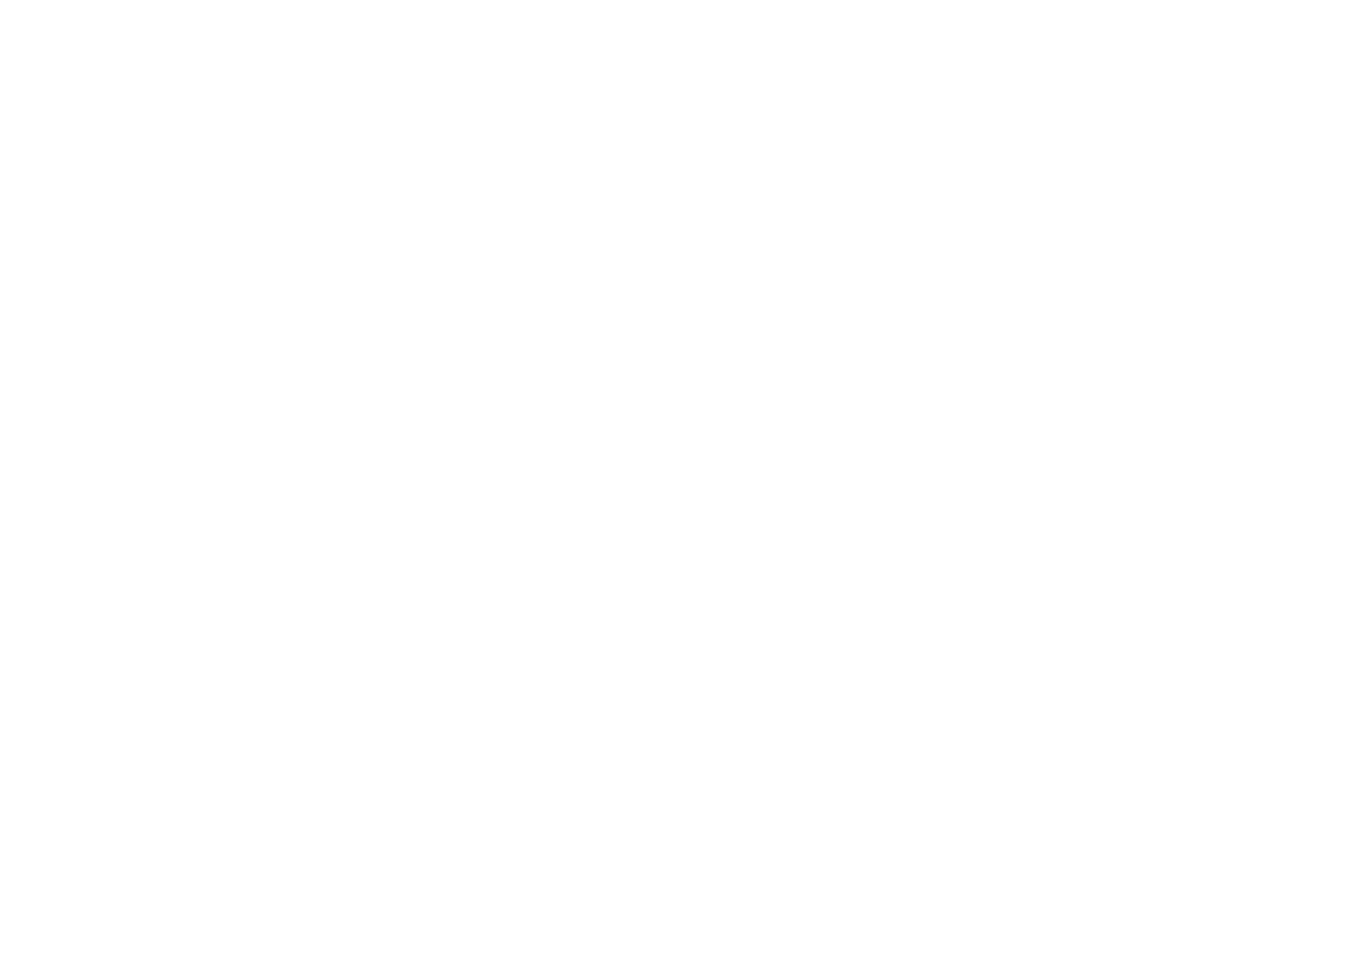 Zoom Workplace 로고